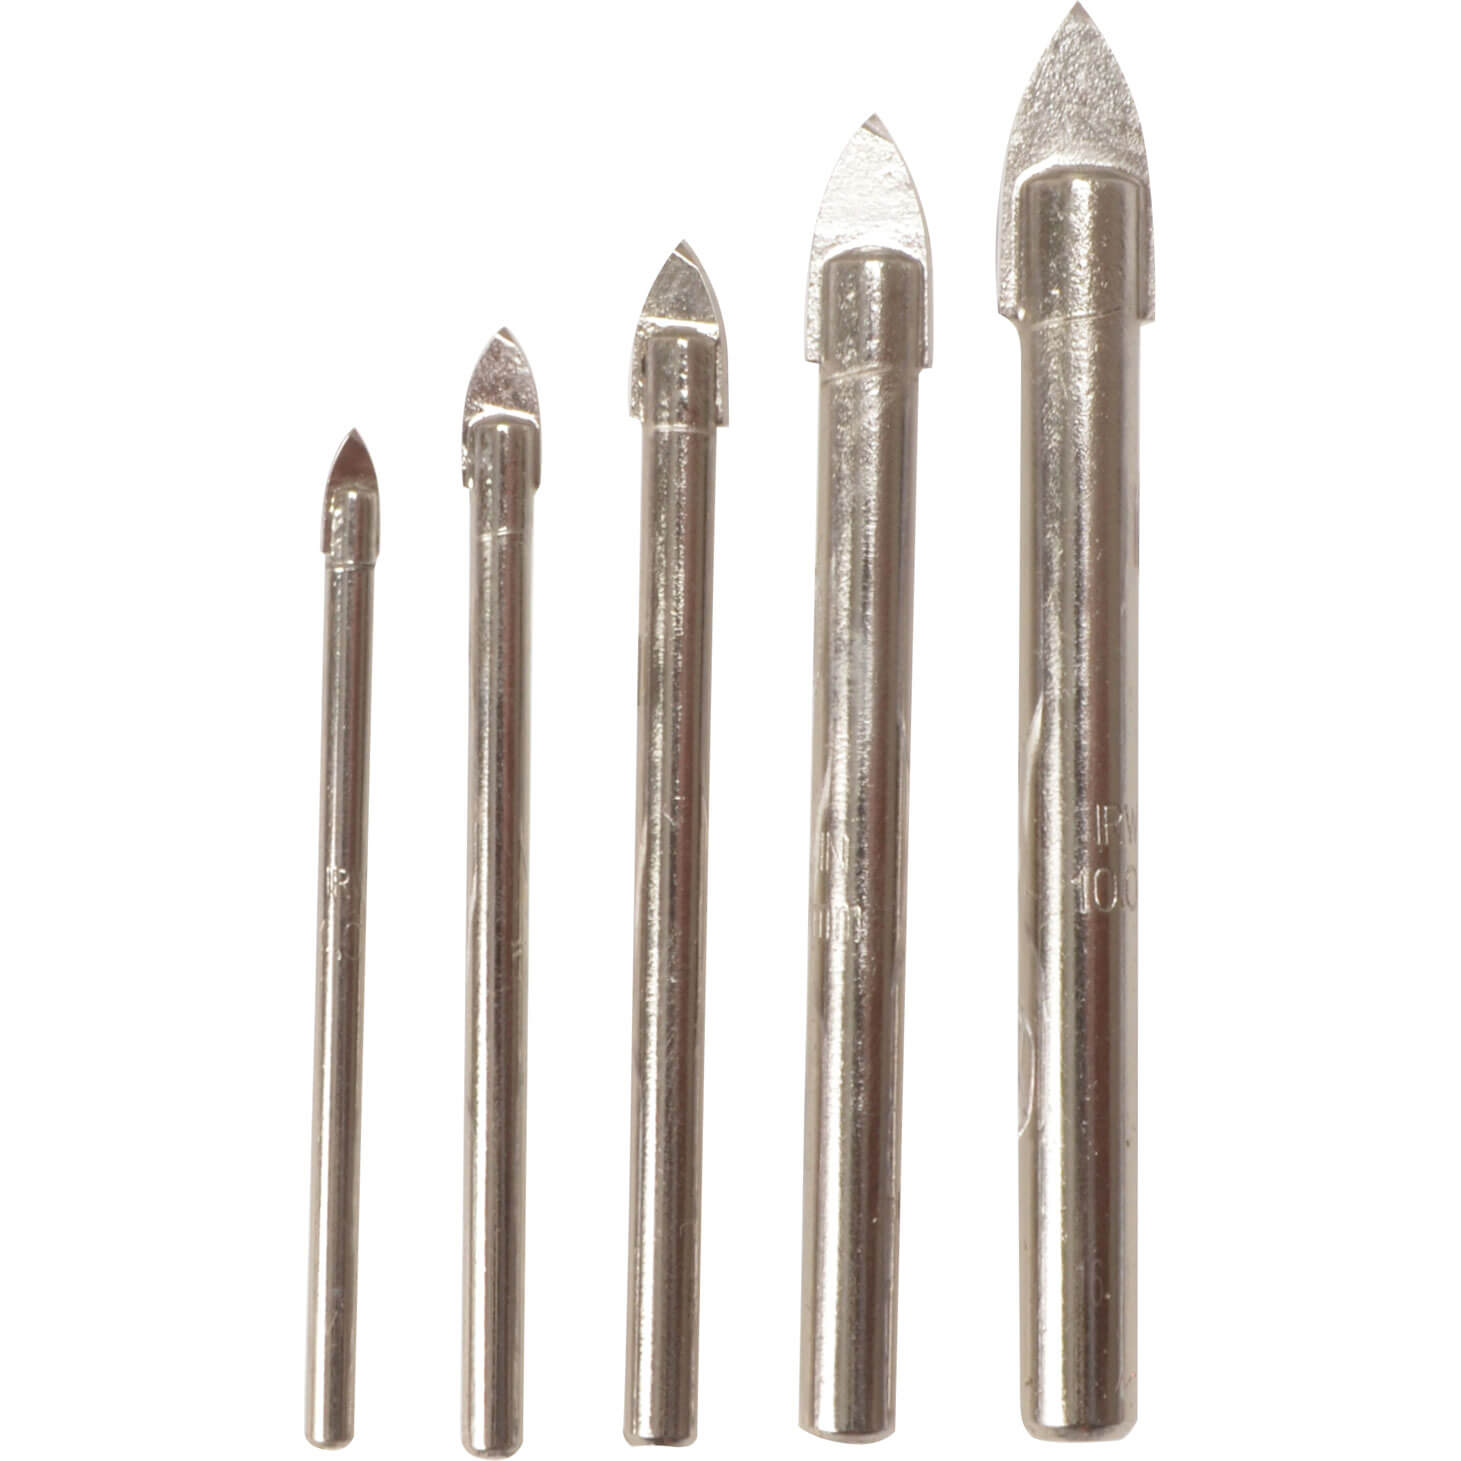 Image of Irwin 5 Piece Glass and Tile Drill Bit Set